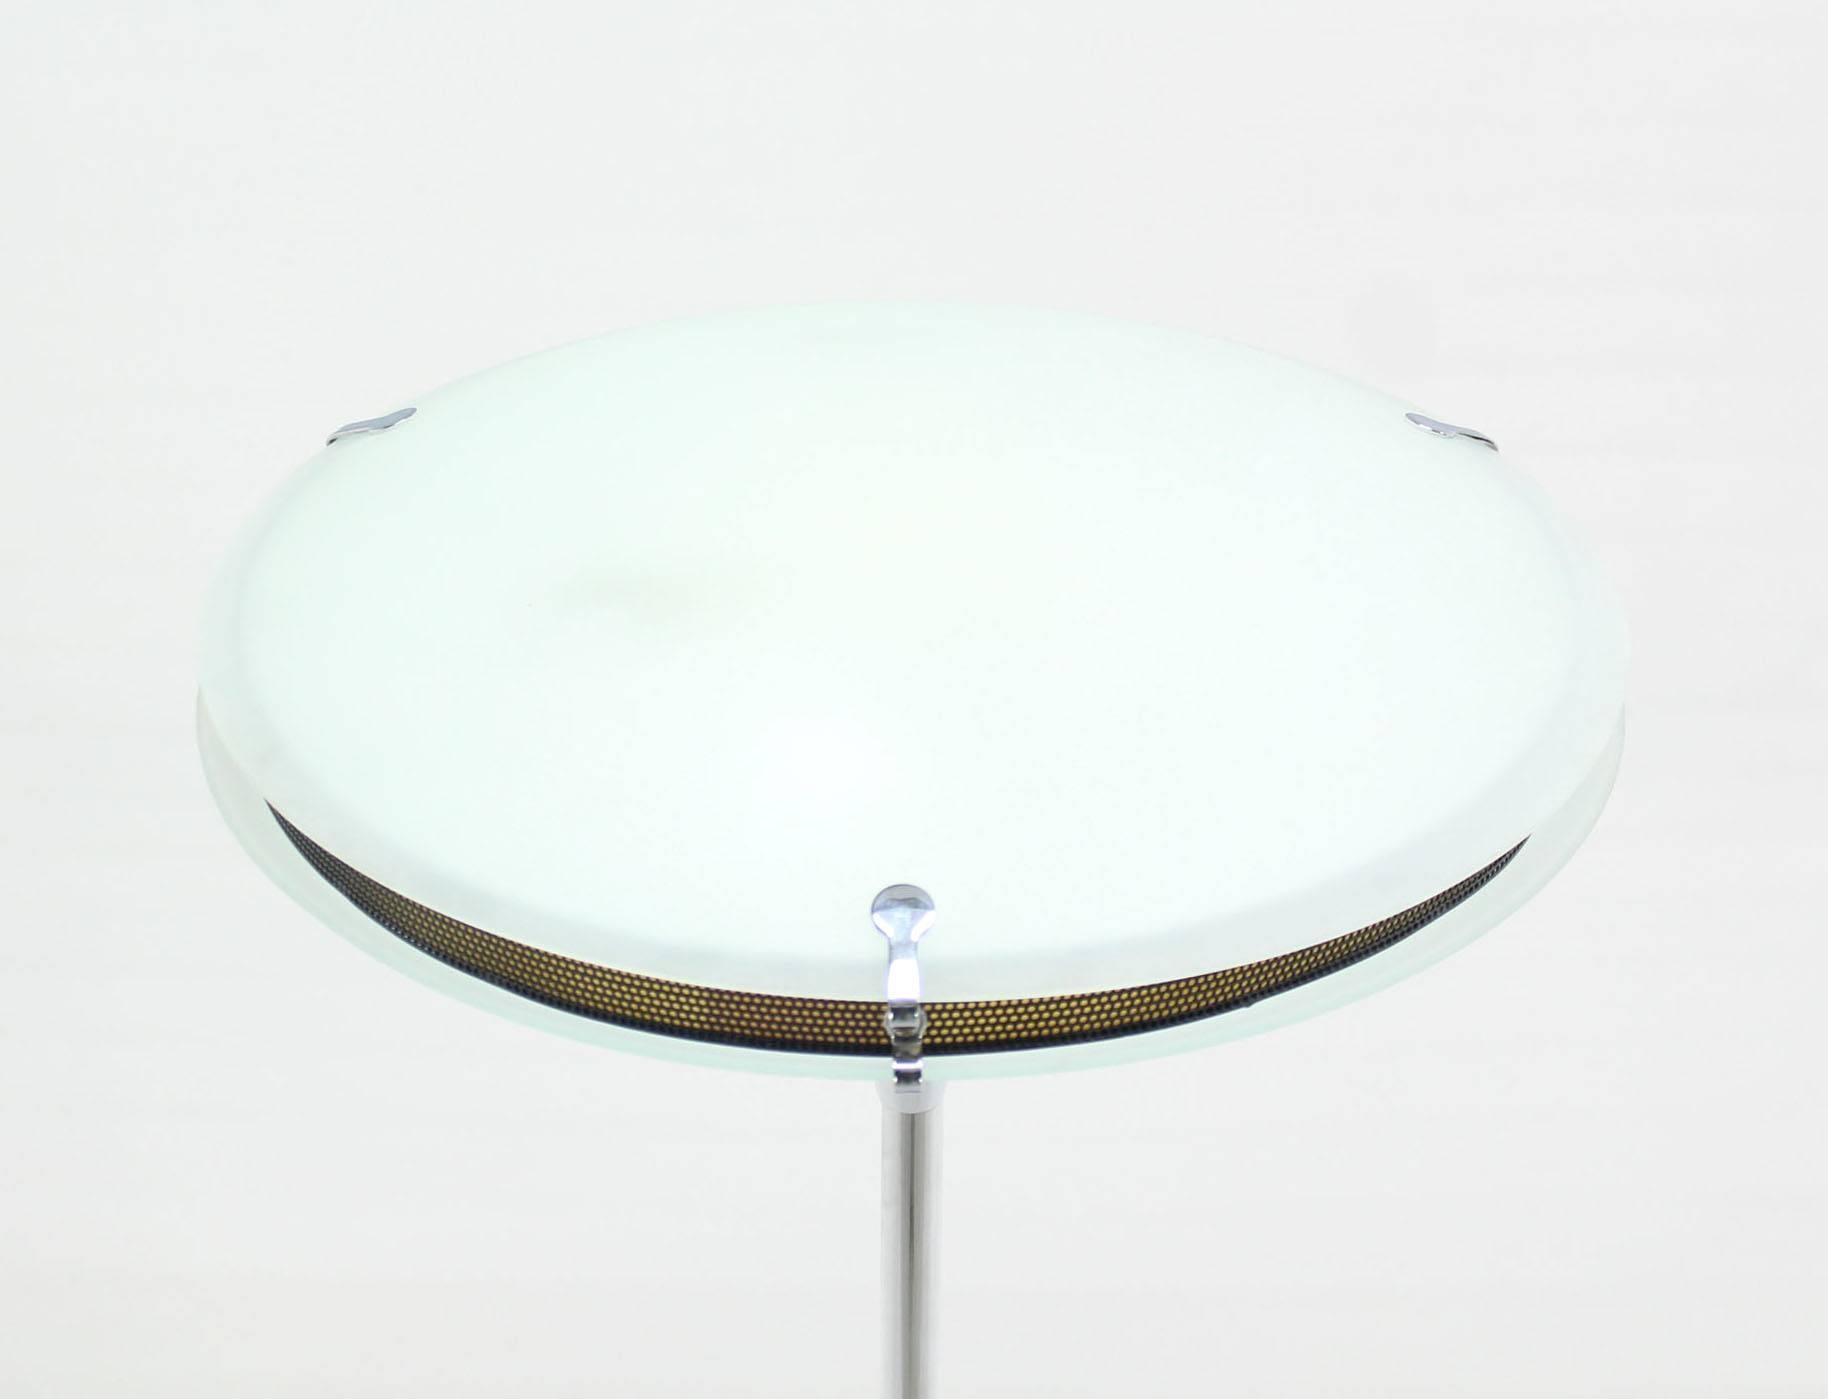 Chrome Saucer Shape Shade Top Frosted Glass Floor Lamp   In Good Condition For Sale In Rockaway, NJ